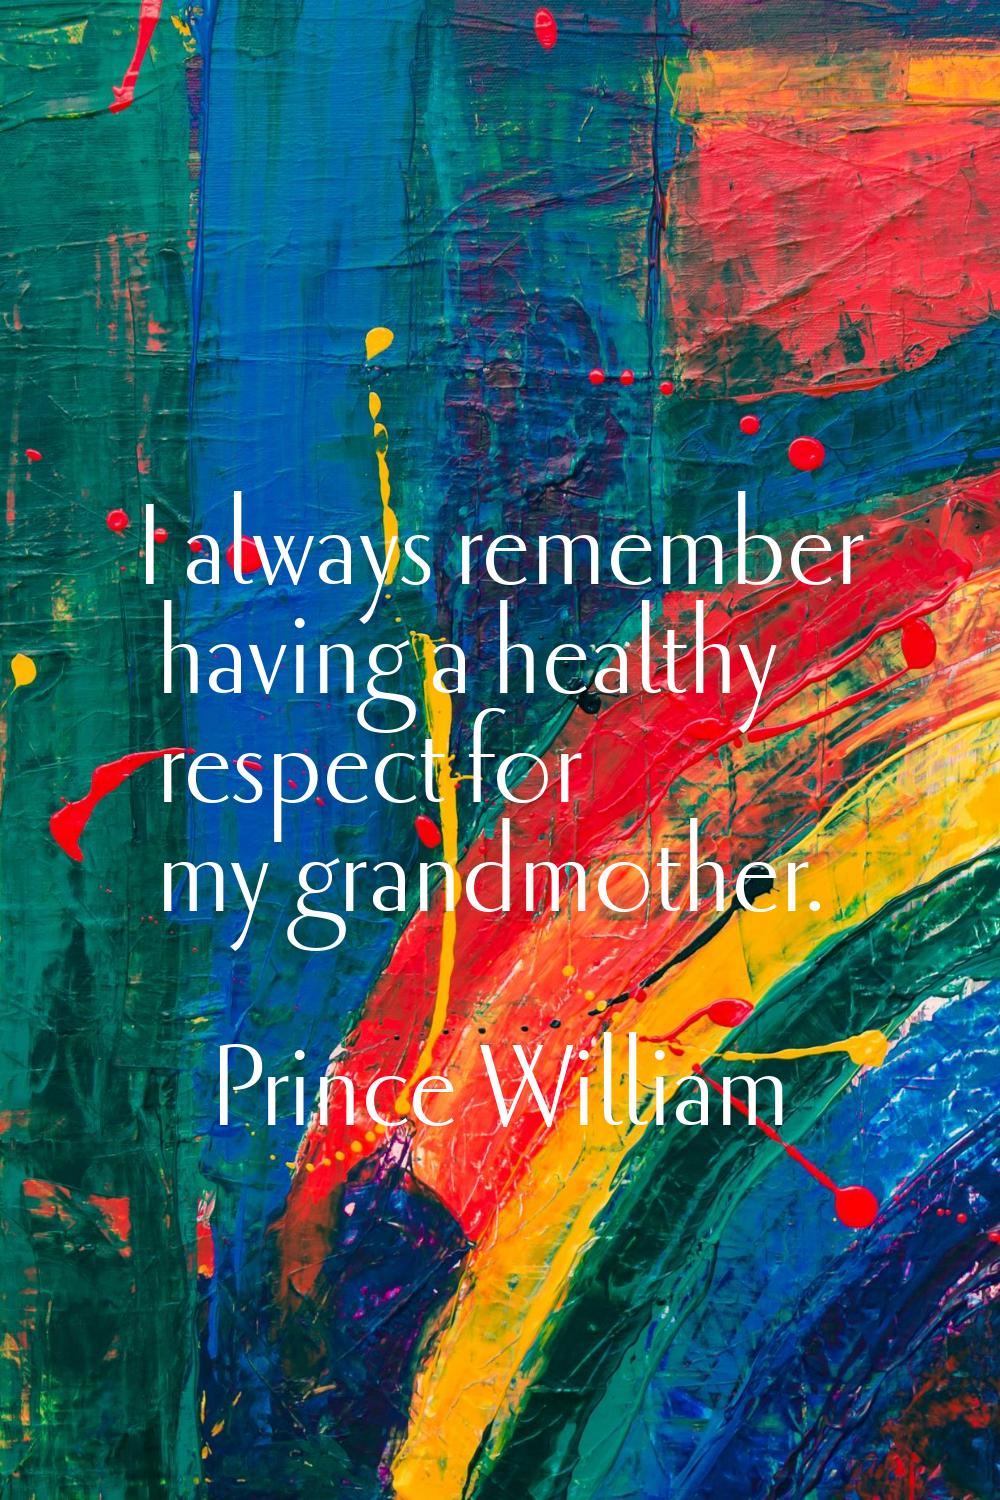 I always remember having a healthy respect for my grandmother.